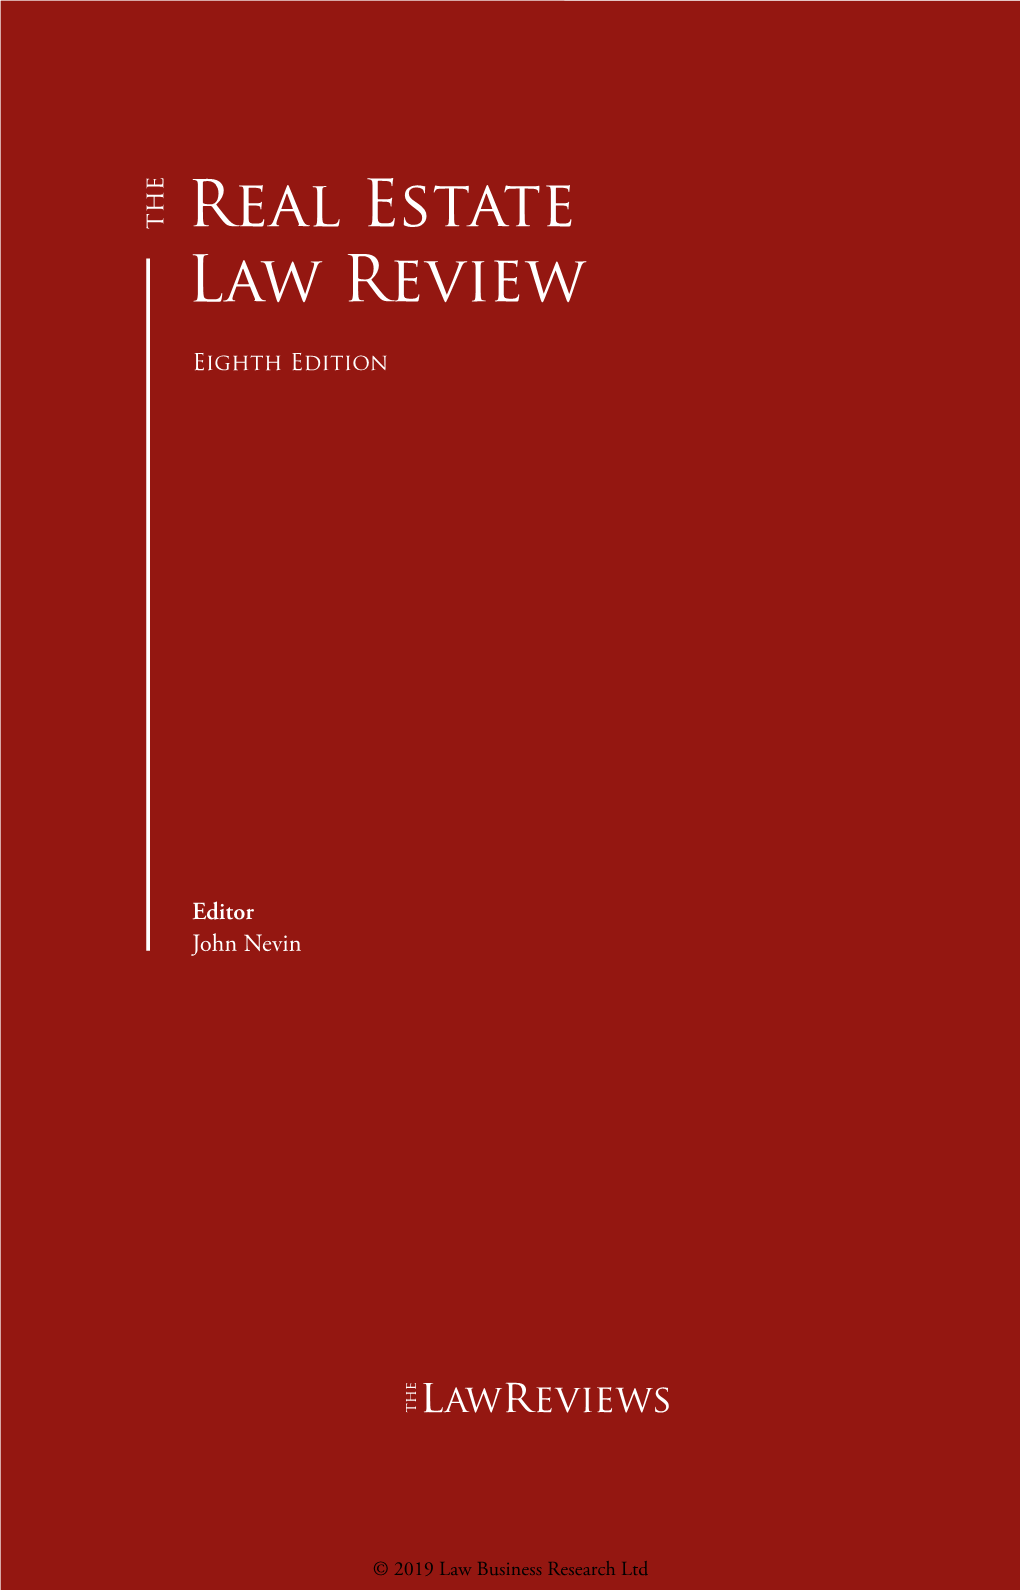 The Real Estate Law Review Real Estate Law Review